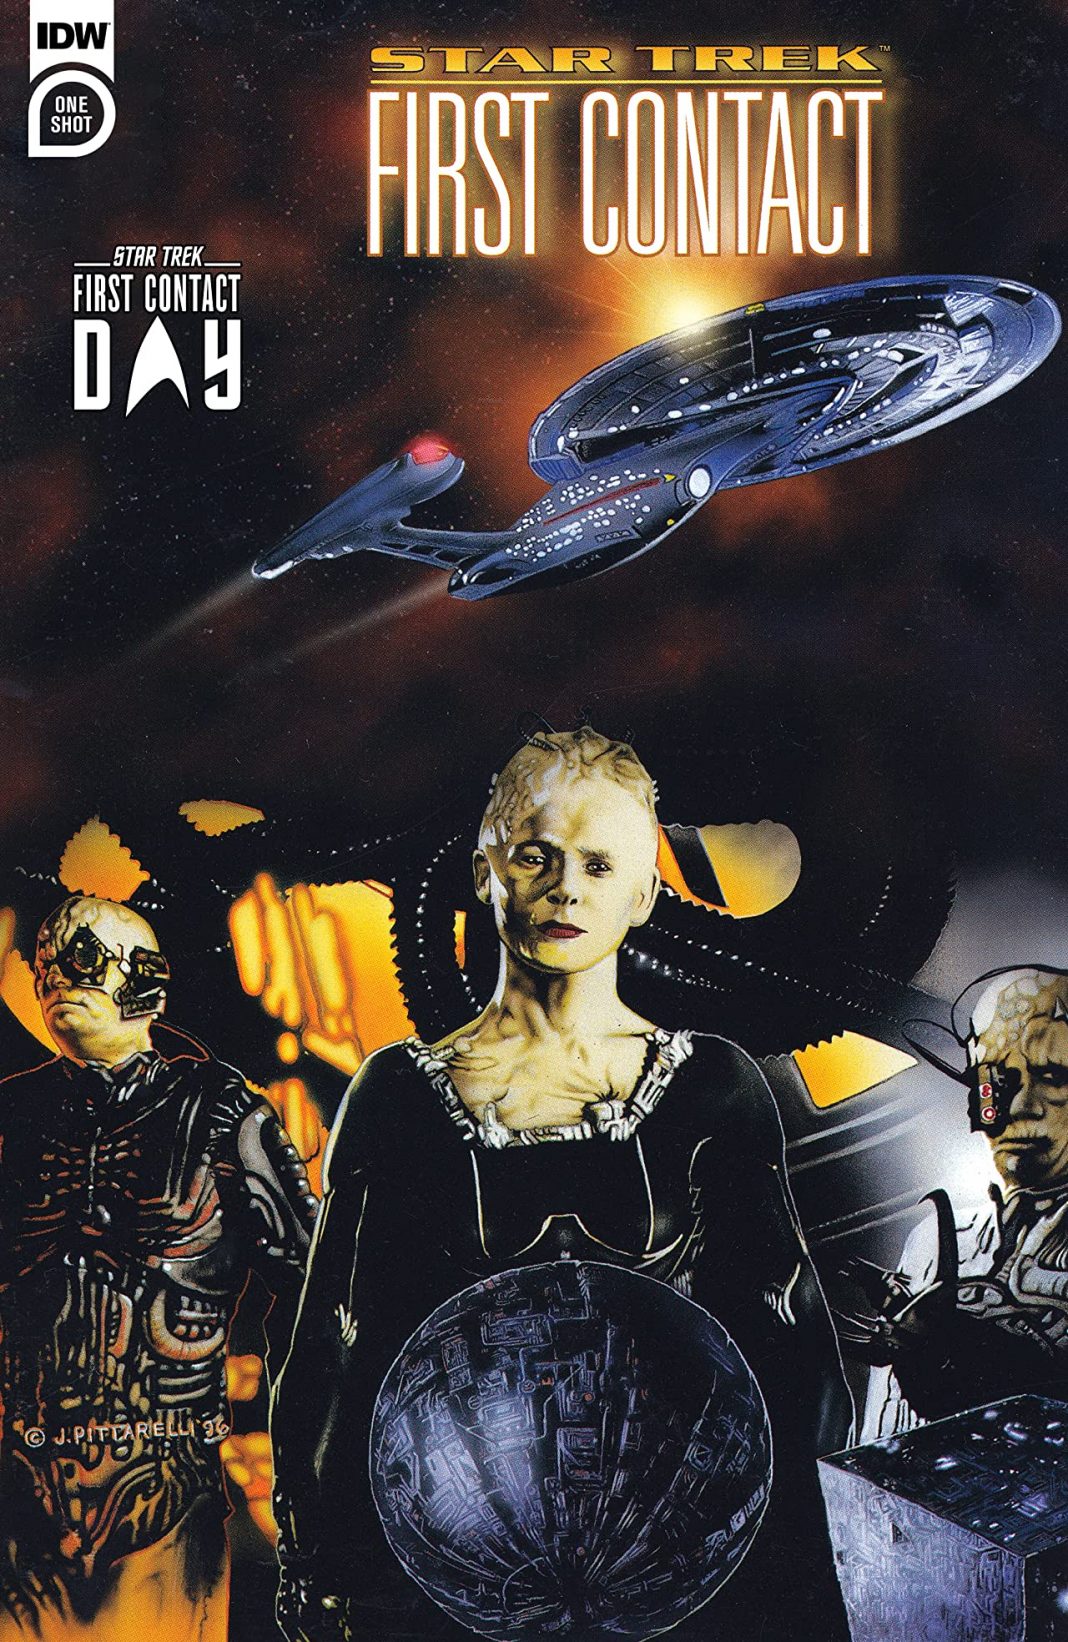 UPDATED First Contact Day Star Trek Deals to Help You Celebrate